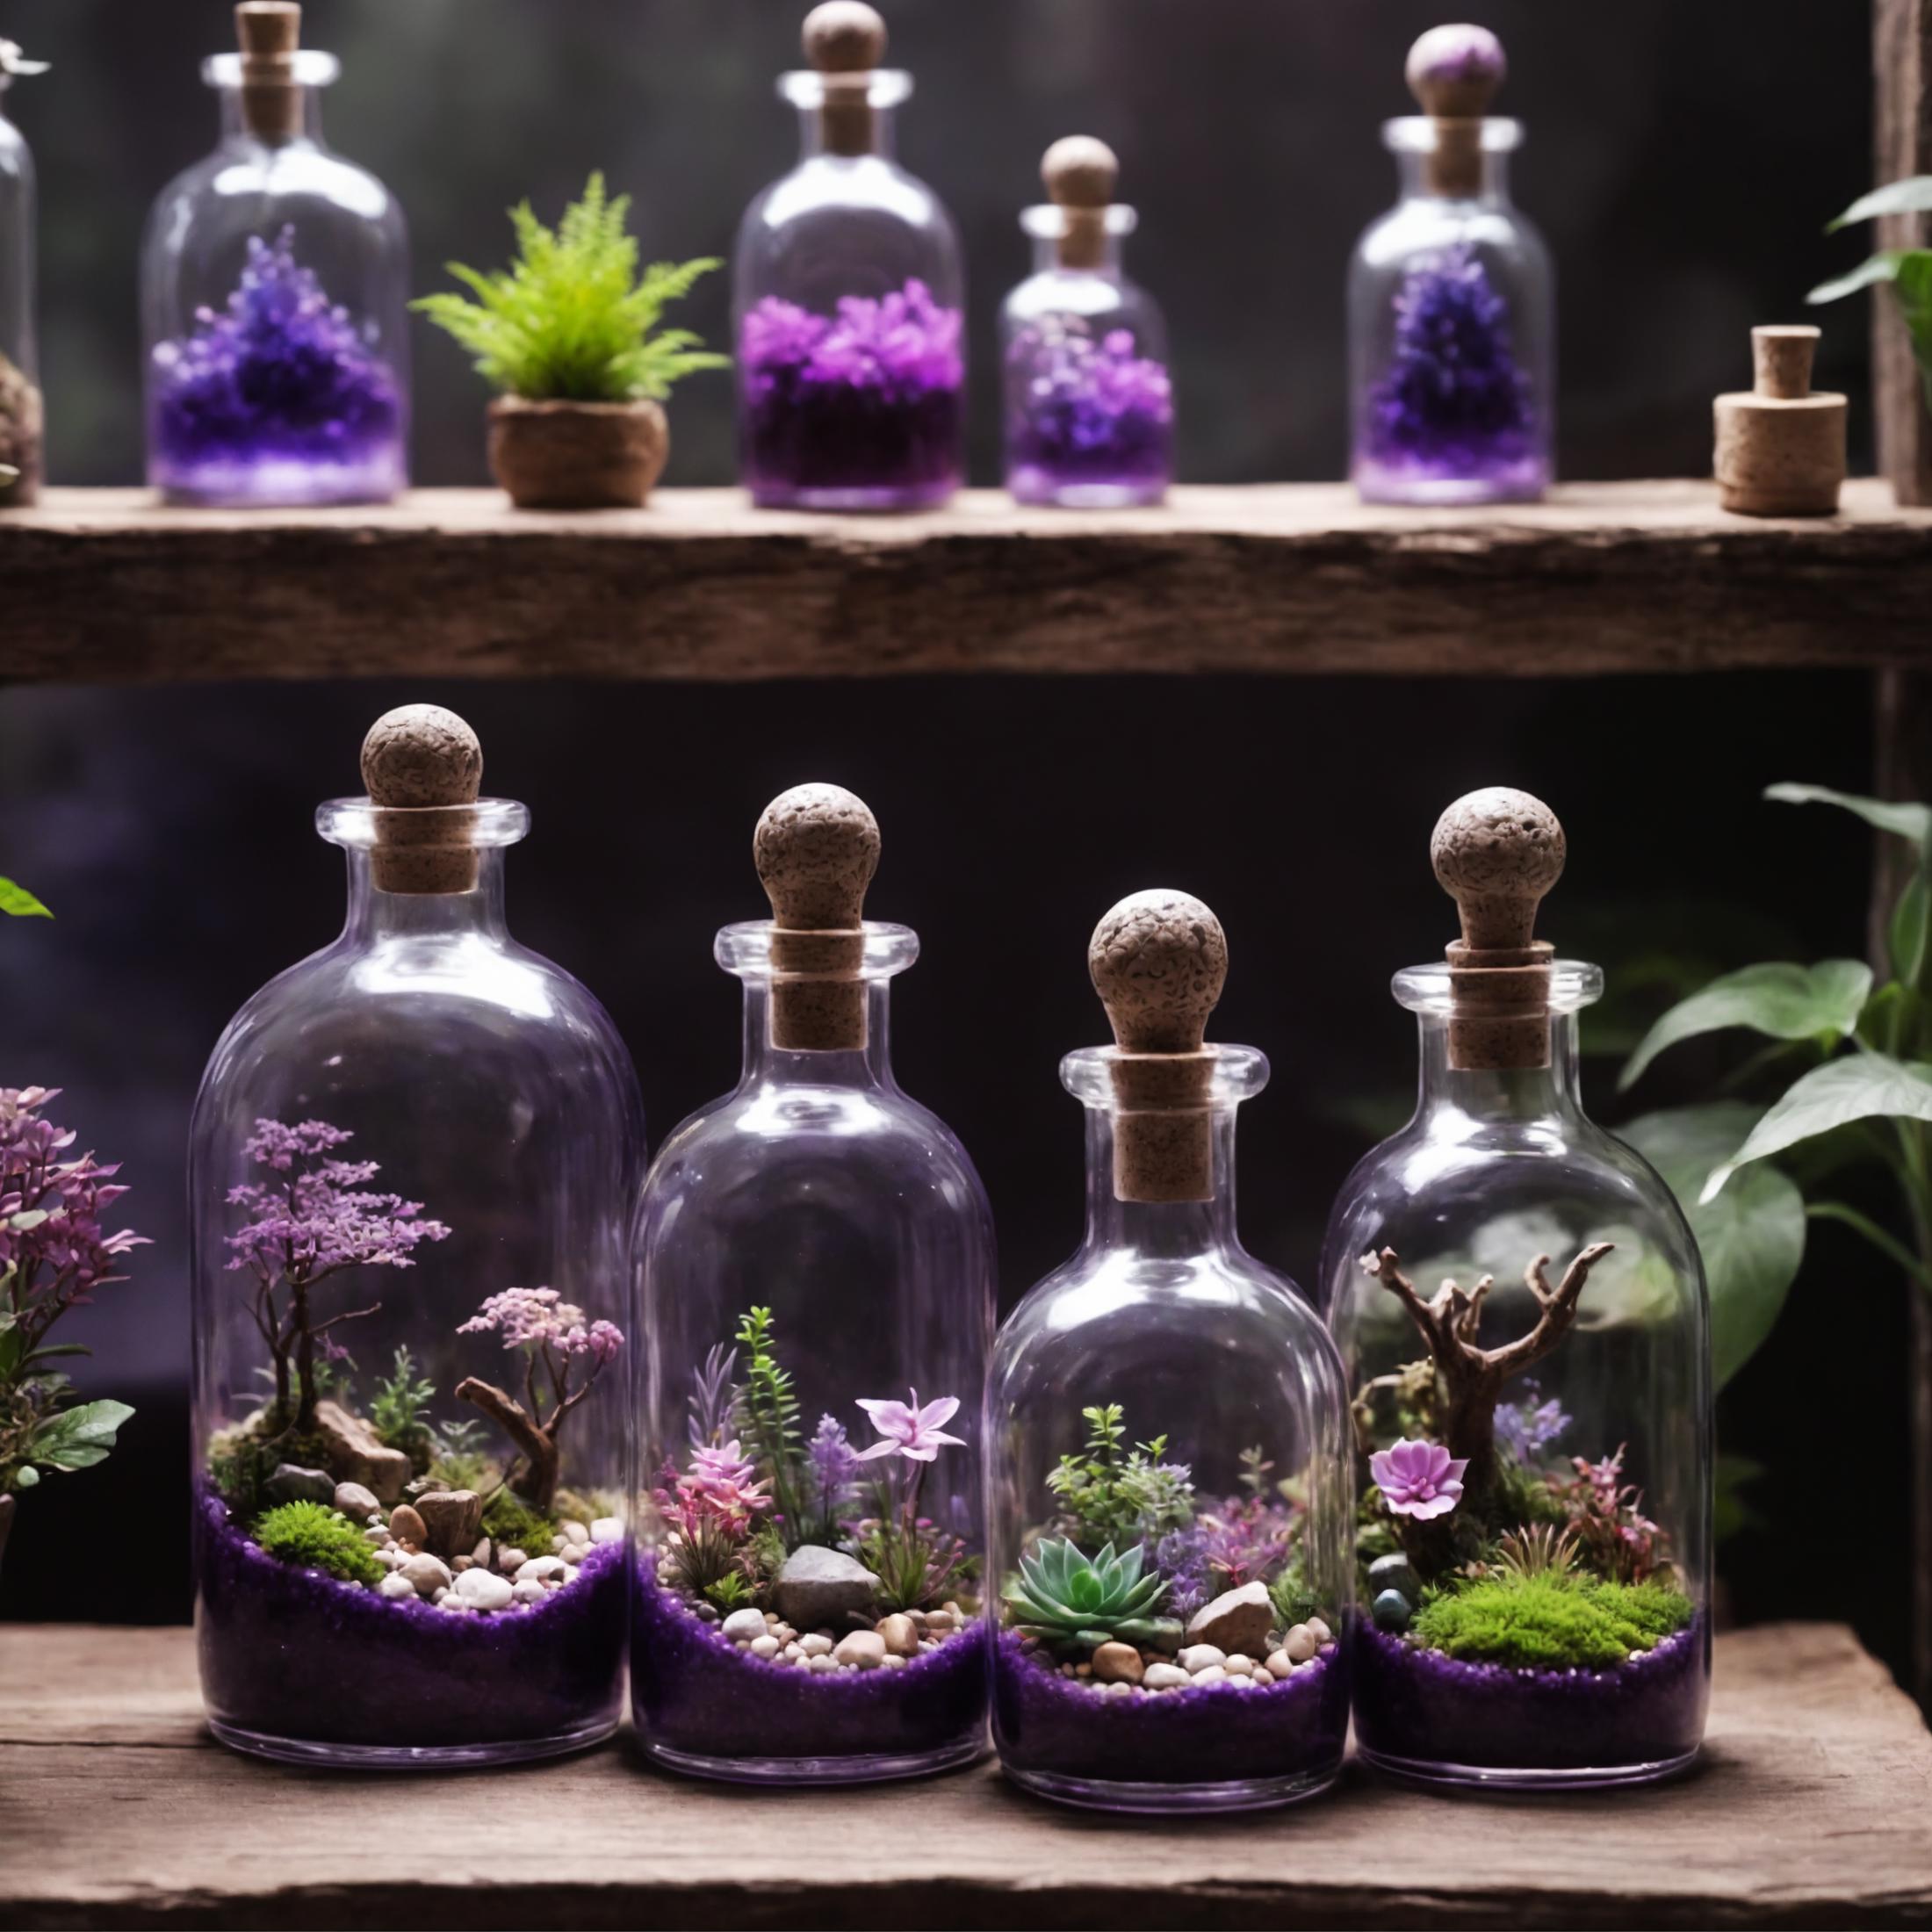 Display of five purple glass vases on a wooden shelf containing small plants and rocks.